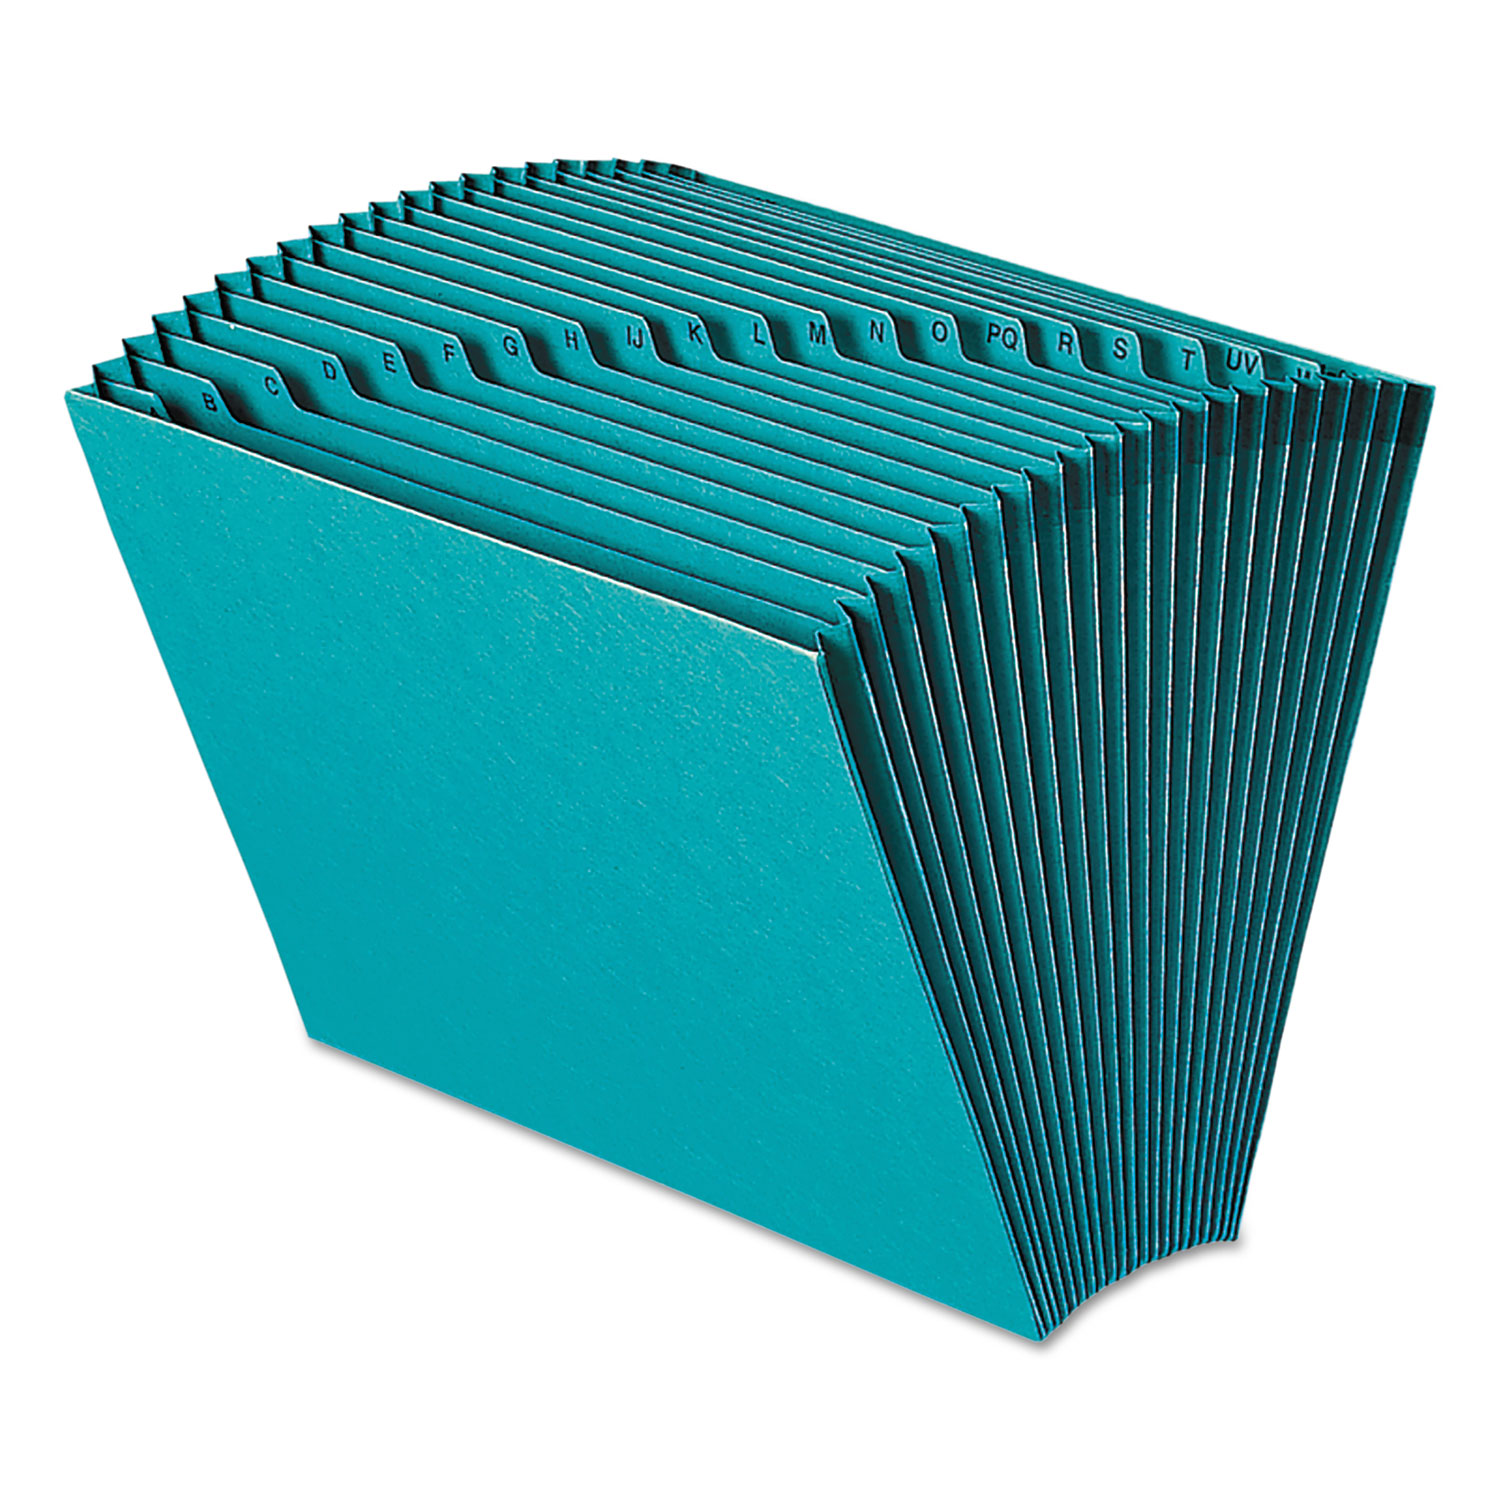  Smead 70717 Heavy-Duty Indexed Expanding Open Top Color Files, 21 Sections, 1/21-Cut Tab, Letter Size, Teal (SMD70717) 